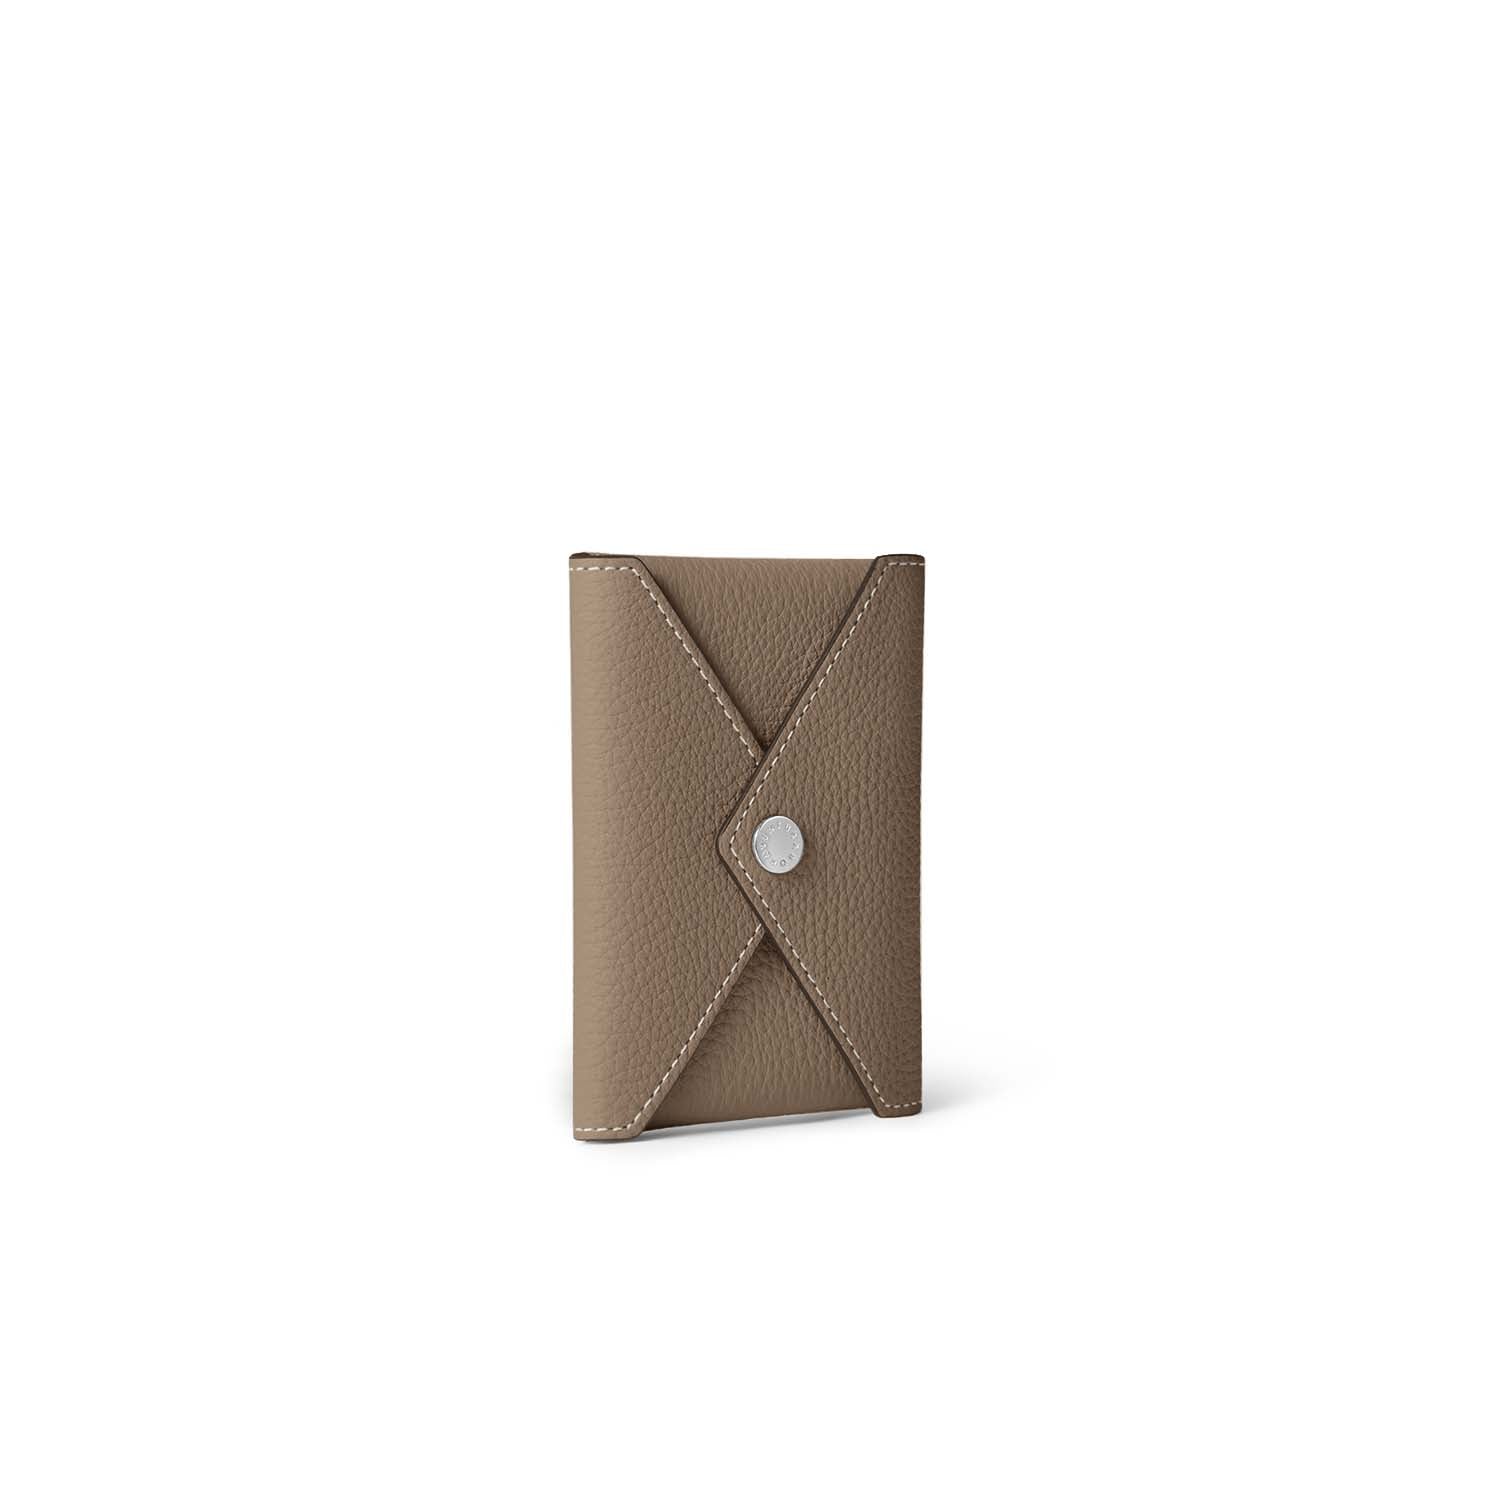 (Snap button back cover case) Envelope pouch in shrink leather